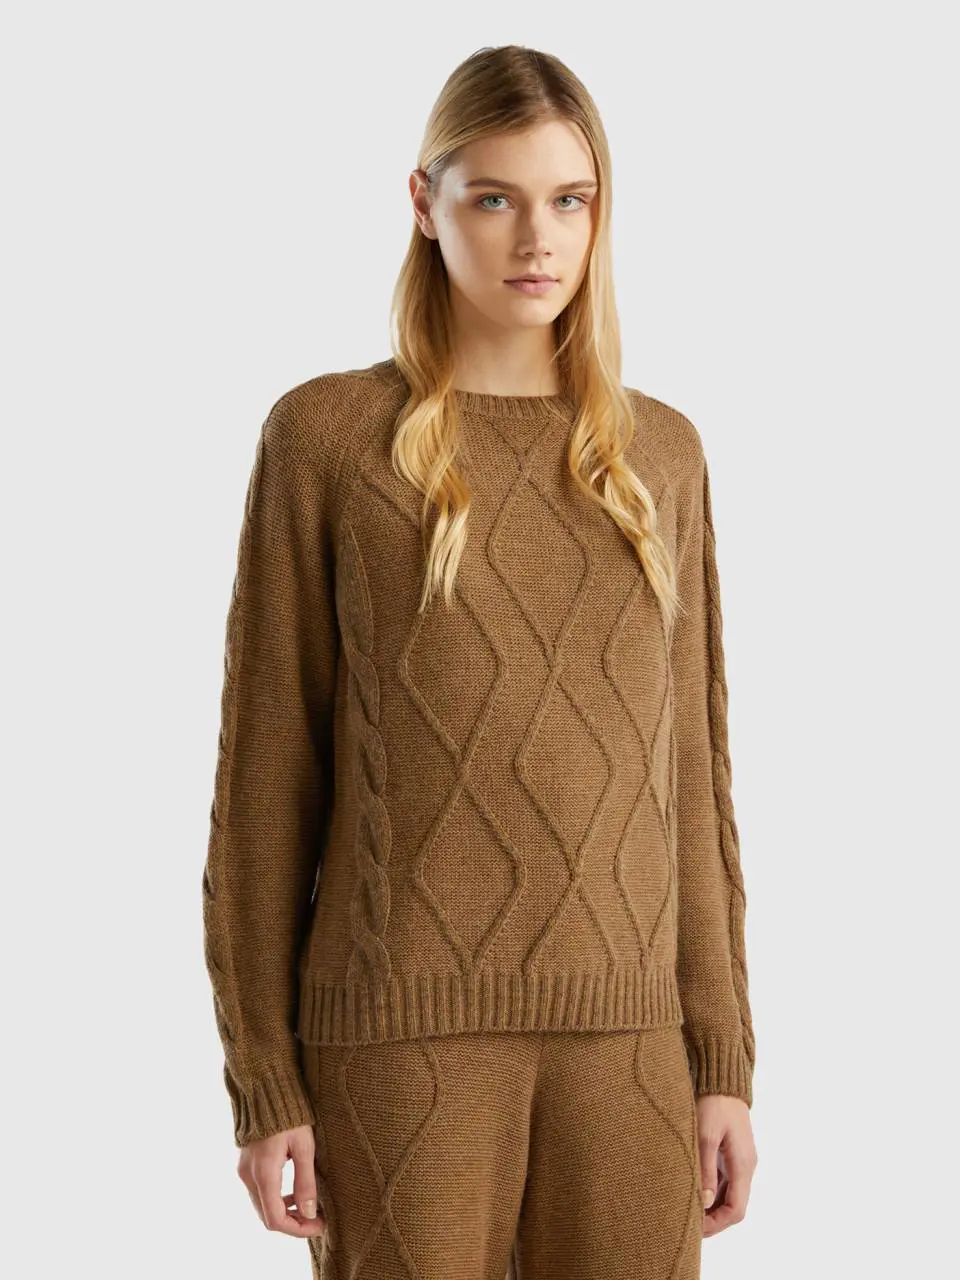 Benetton sweater with cables and diamonds. 1